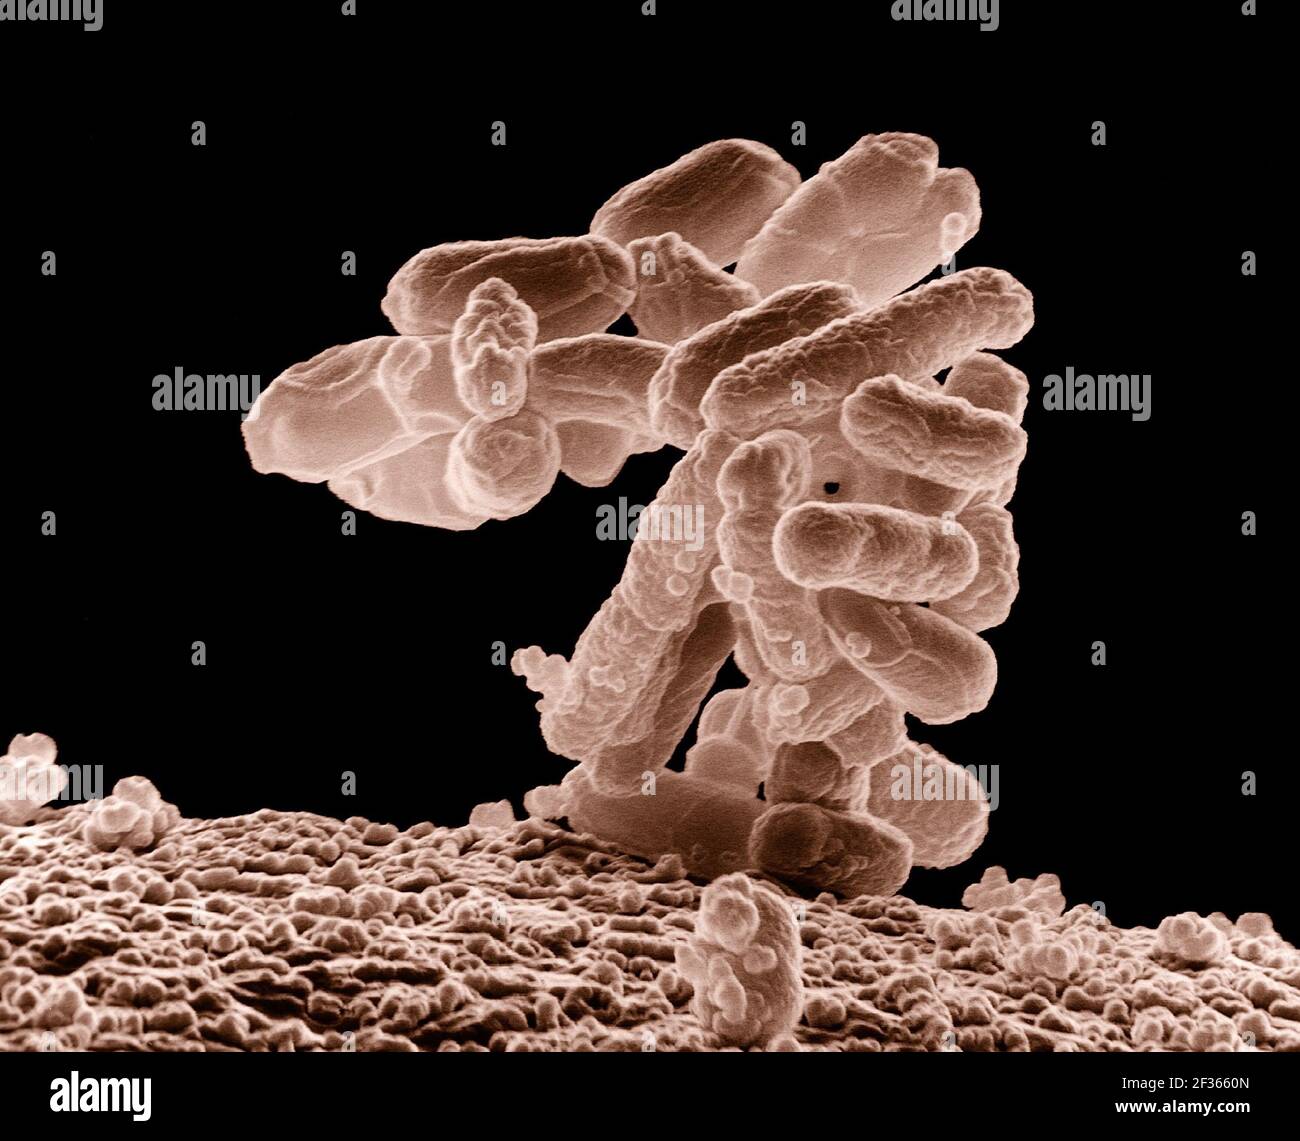 Escherichia Coli Bacteria High Resolution Stock Photography And Images Alamy